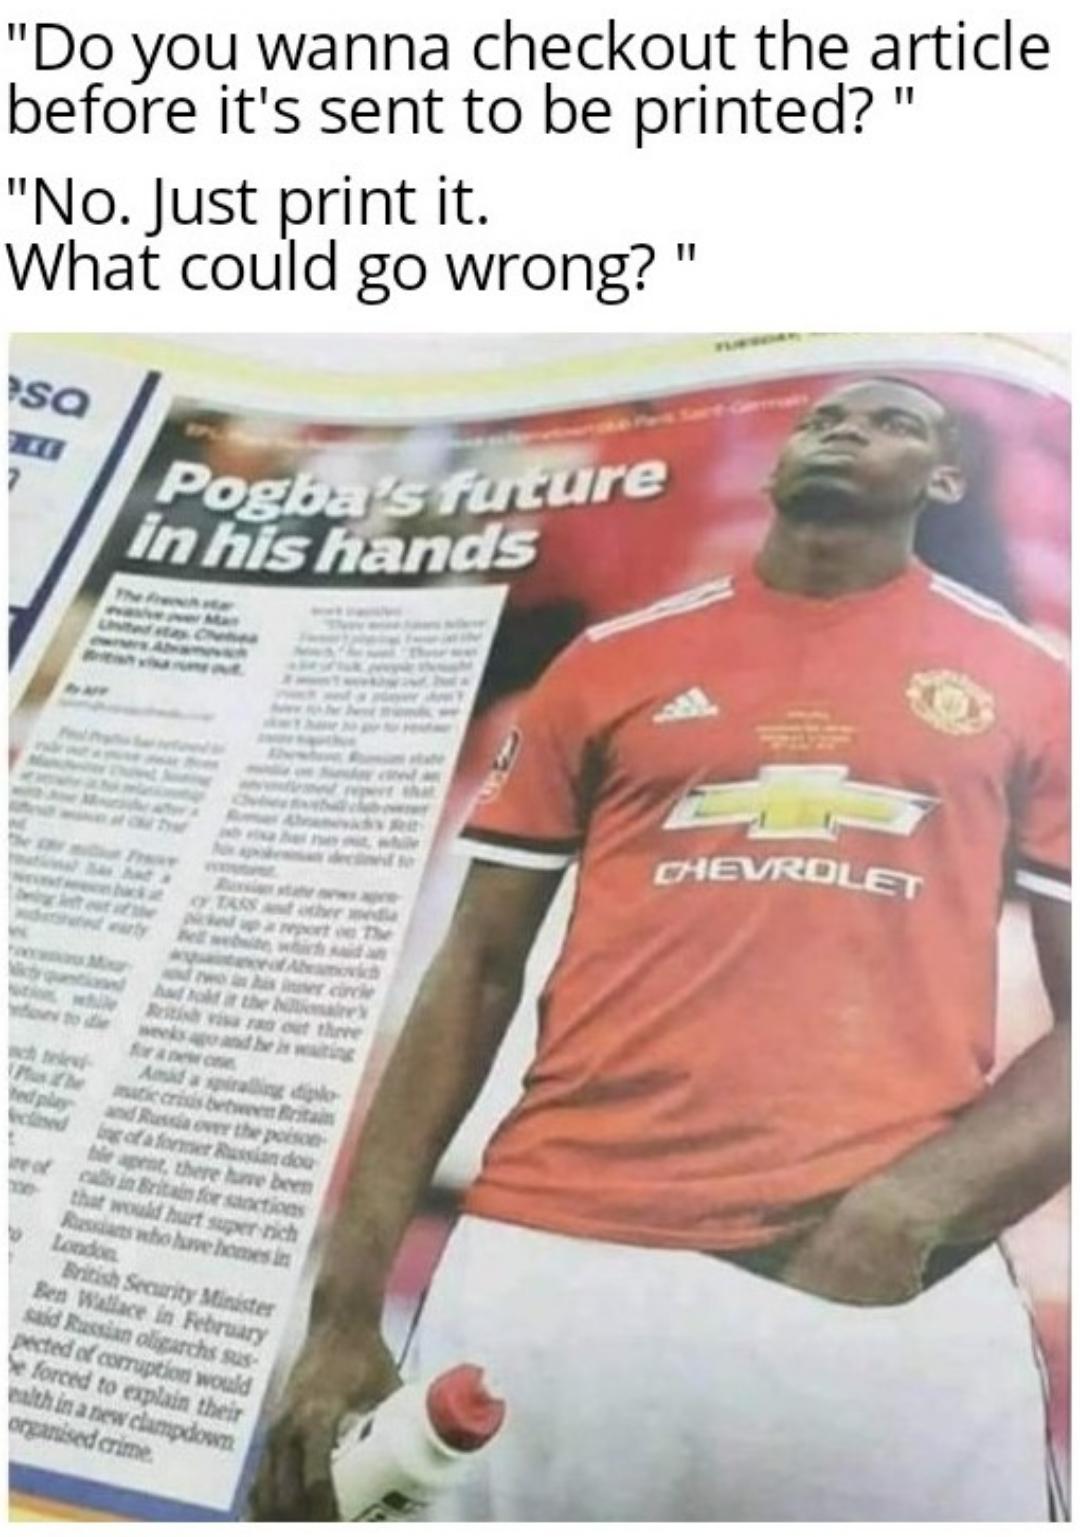 dank memes - pogba future in his hands - "Do you wanna checkout the article before it's sent to be printed?' "No. Just print it. What could go wrong? isa Pogba's future in his hands Chevrolet tot w w